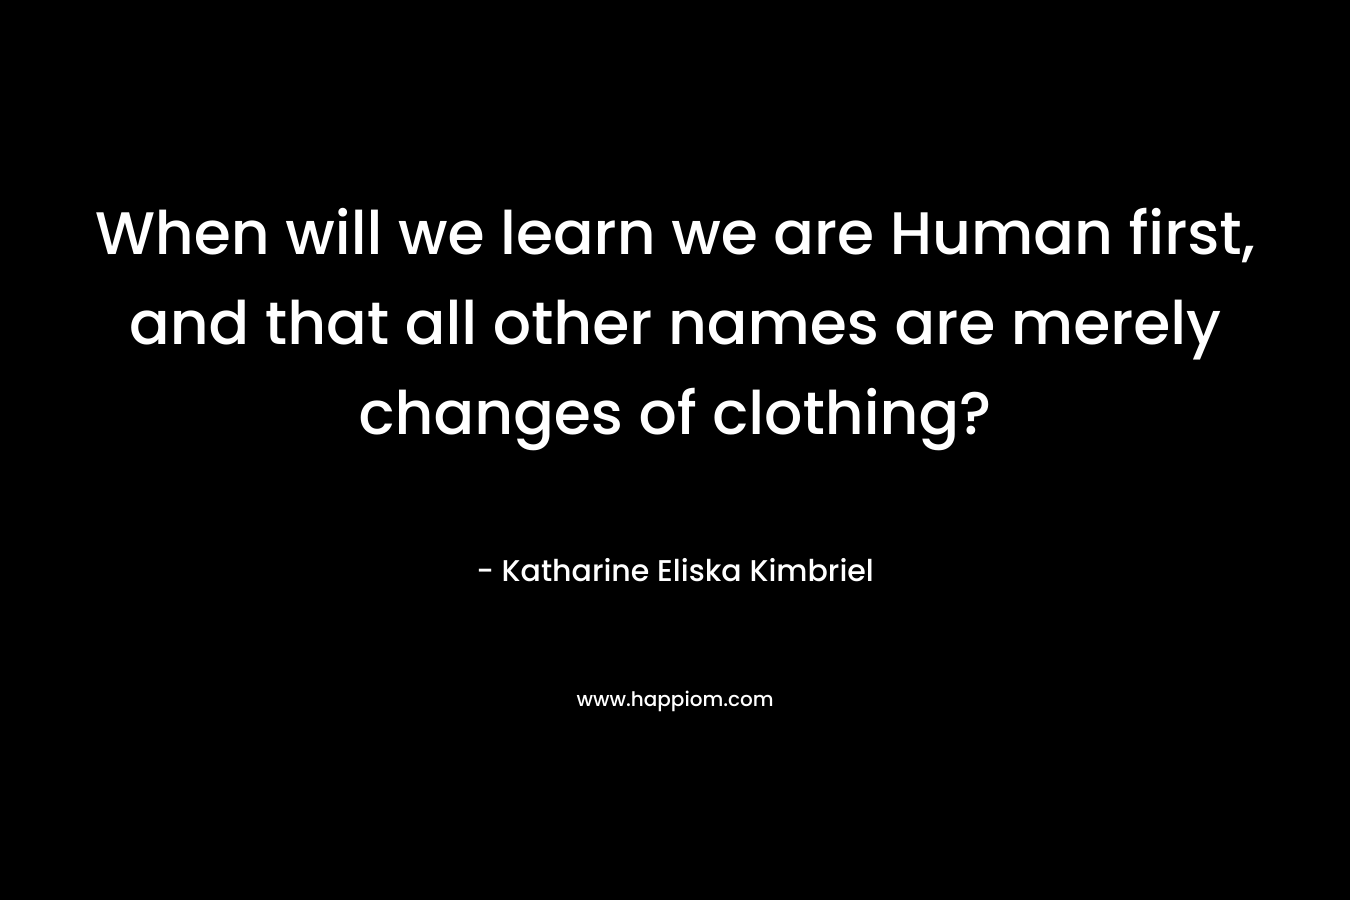 When will we learn we are Human first, and that all other names are merely changes of clothing?